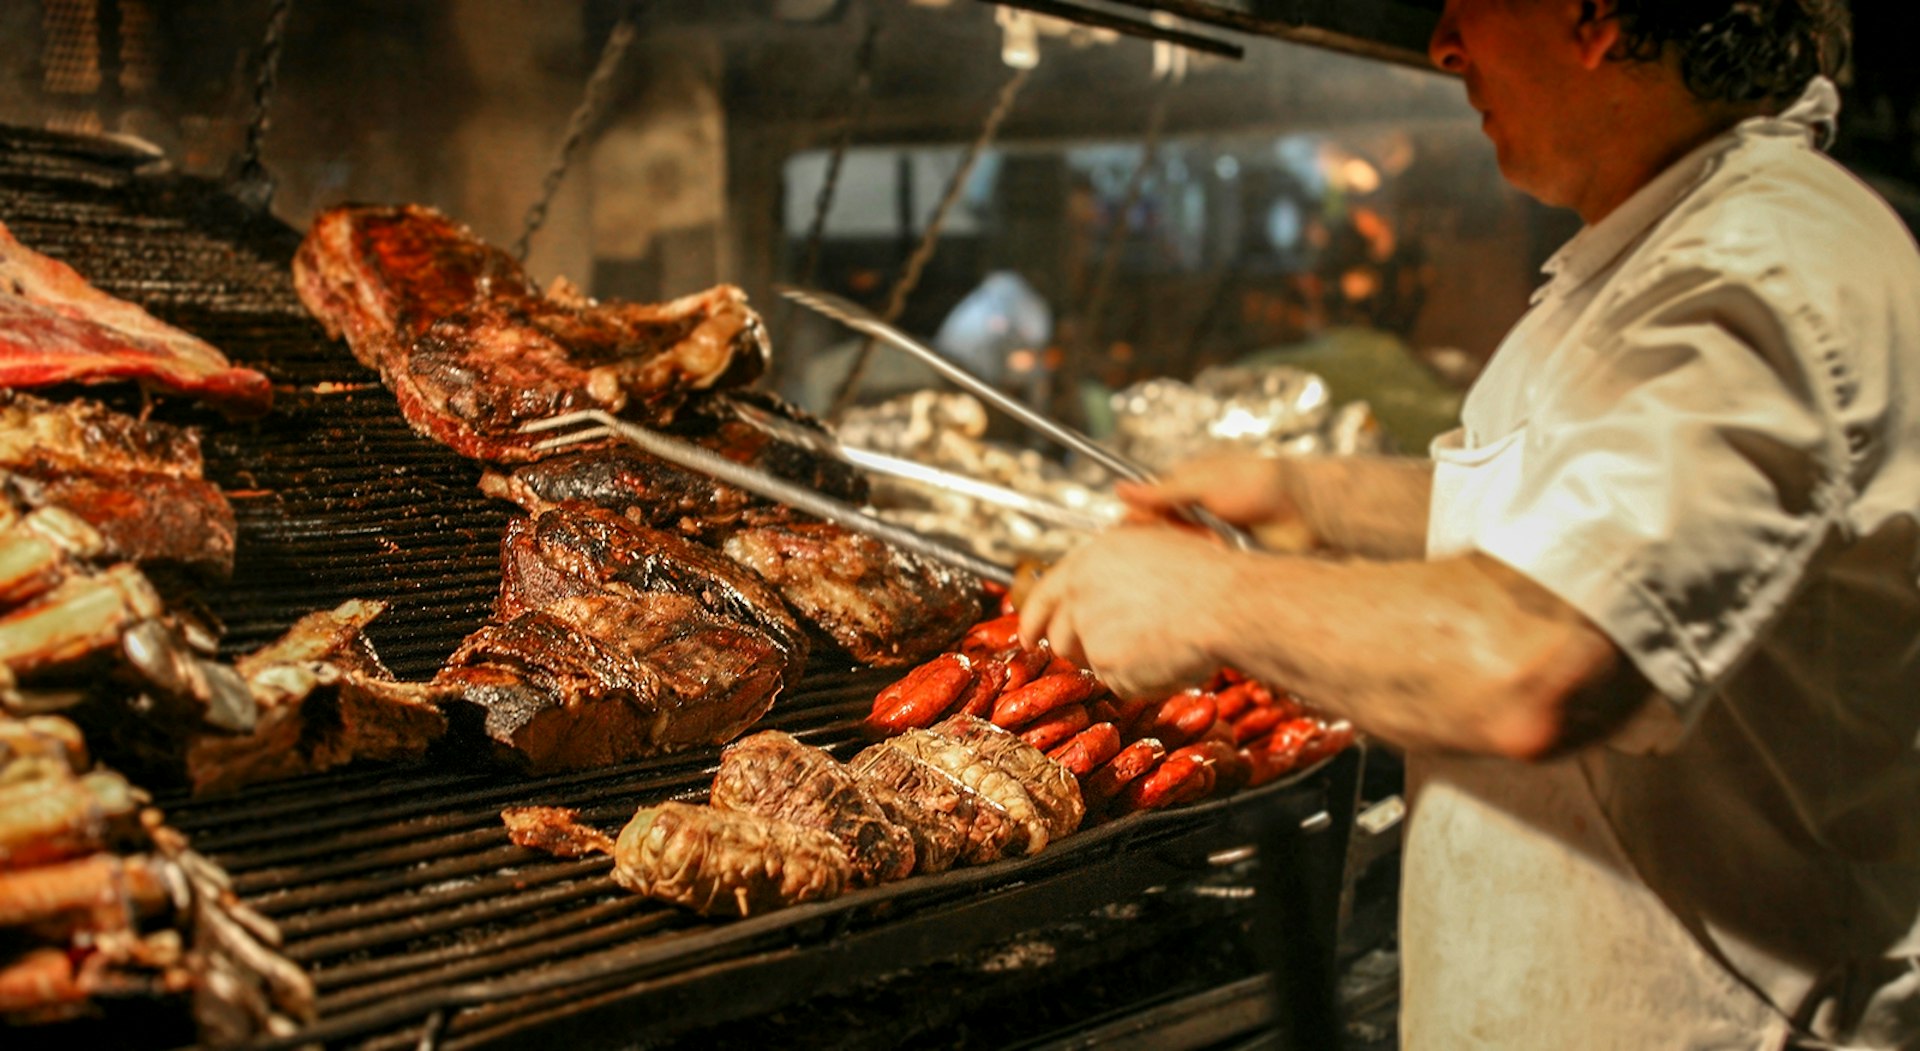 A chef grills large hunks of meat on an iron grill in Argentina